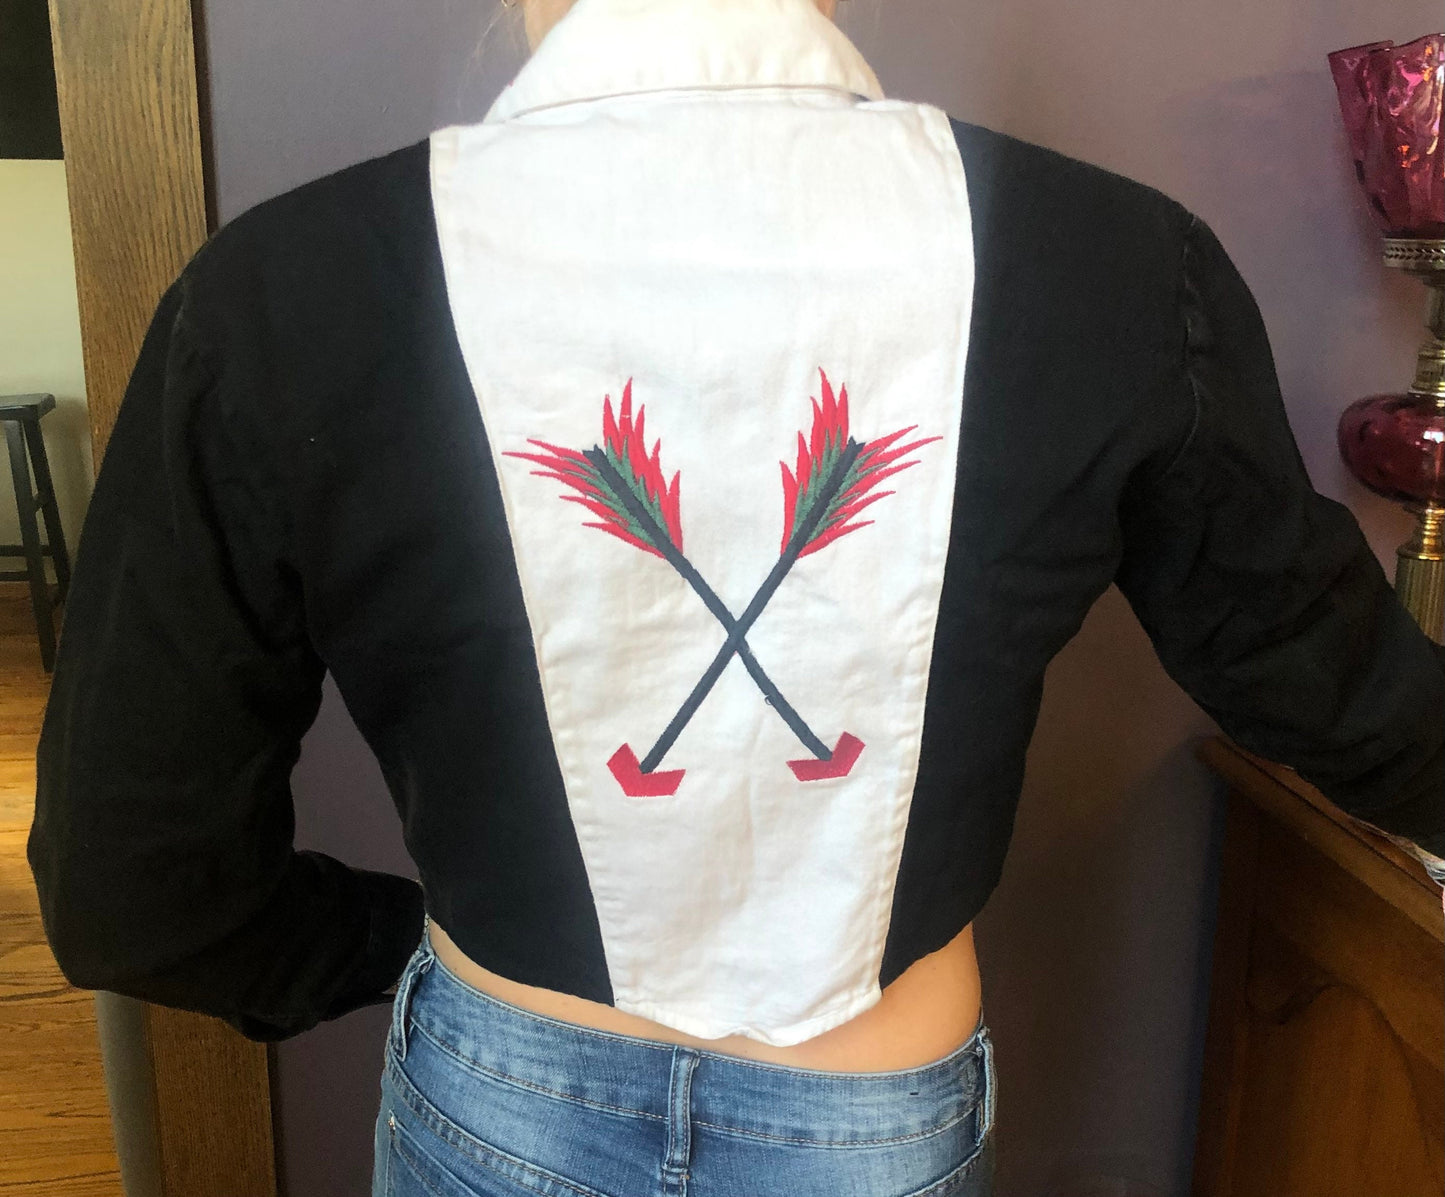 Vintage Western Women’s Sugar Ranch Crop Top Shirt with Embroidered Arrows